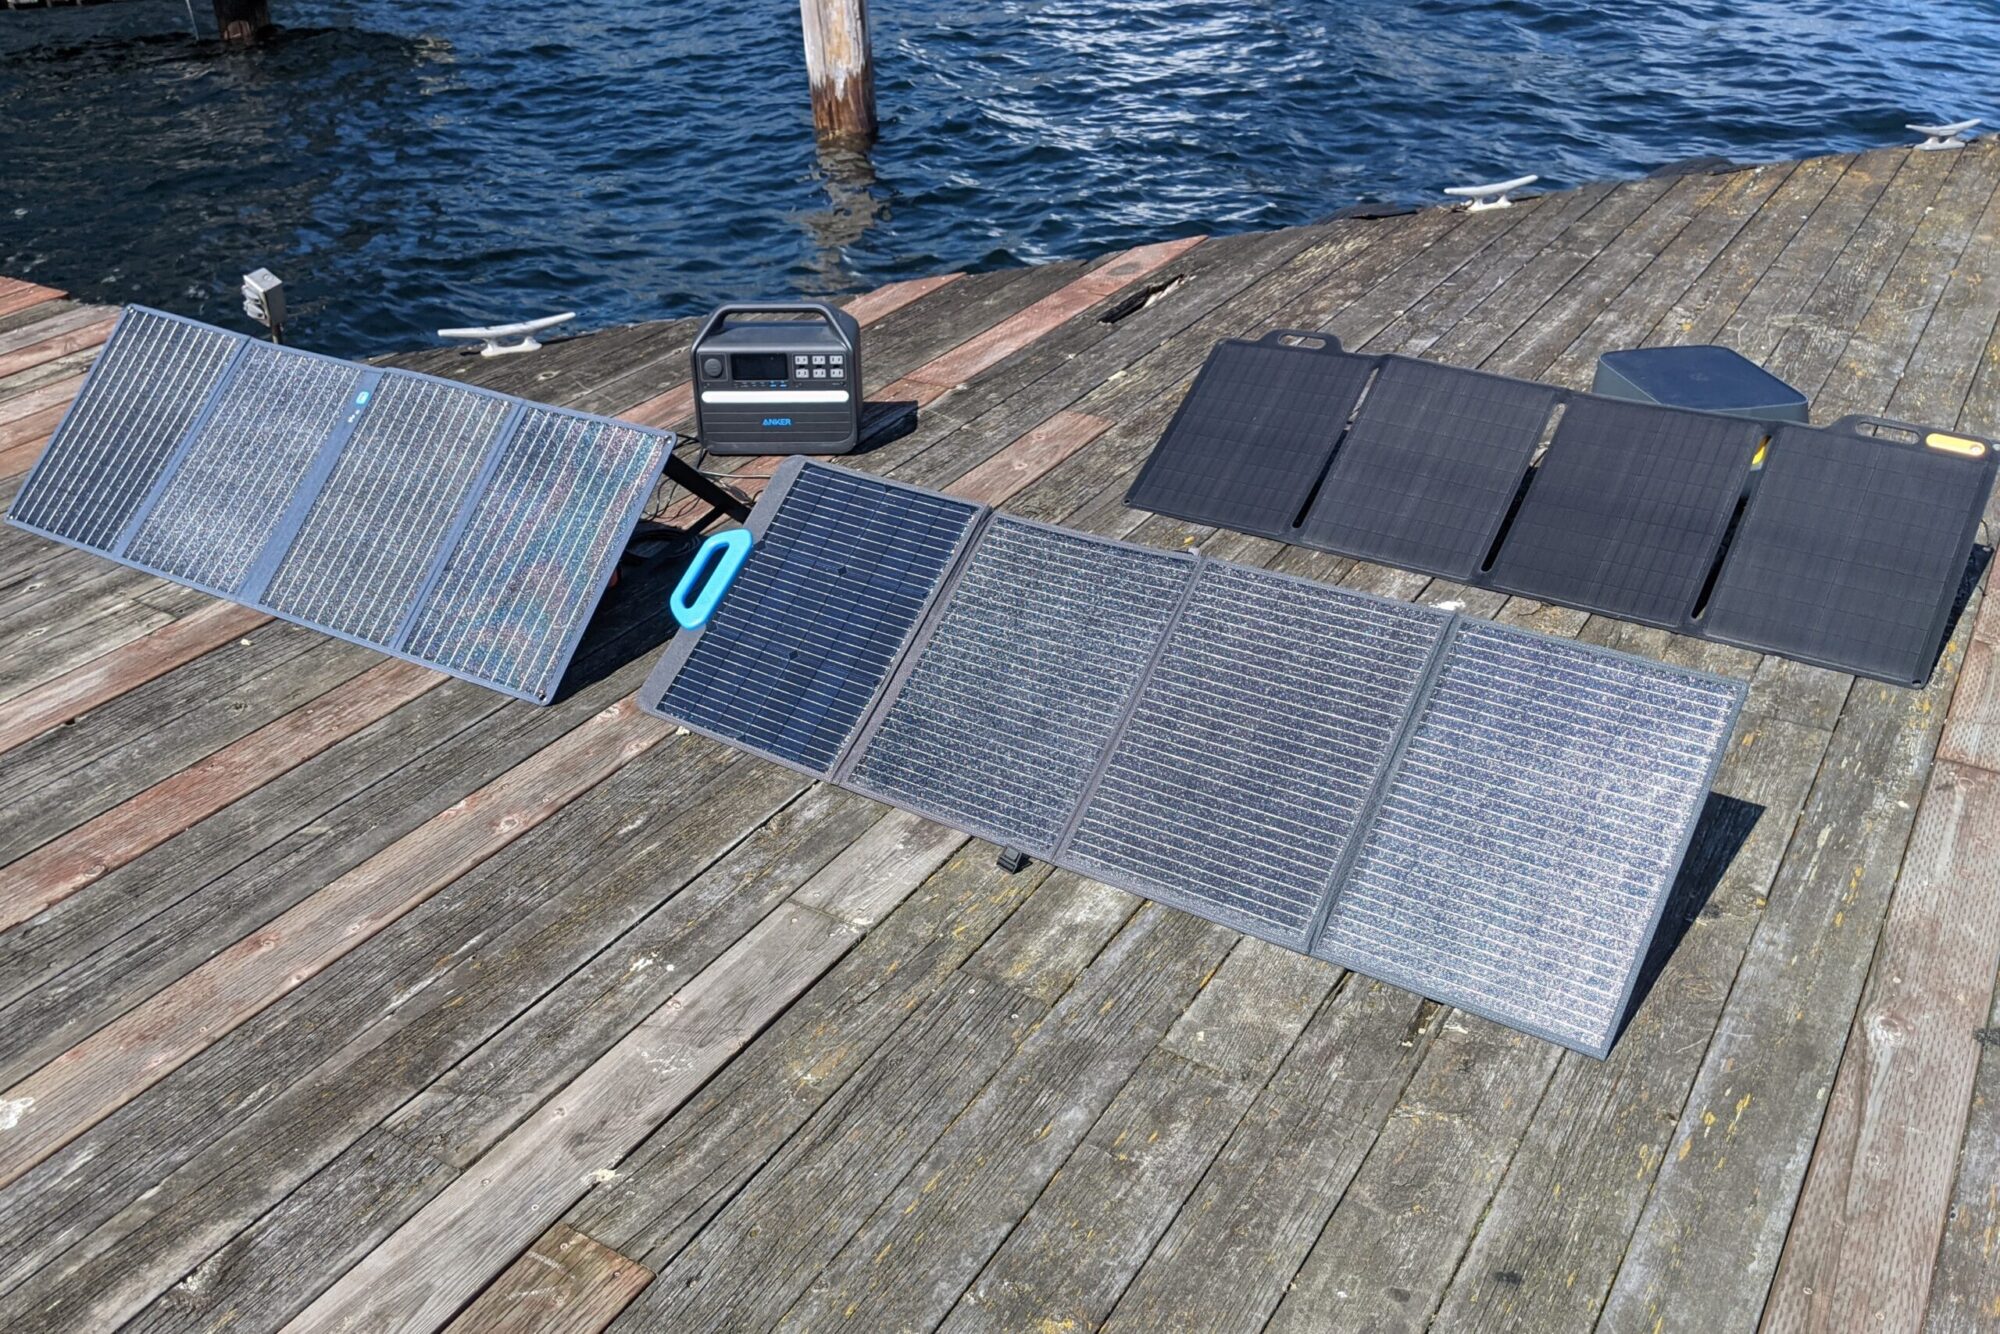 We tested the Bluetti PV120.